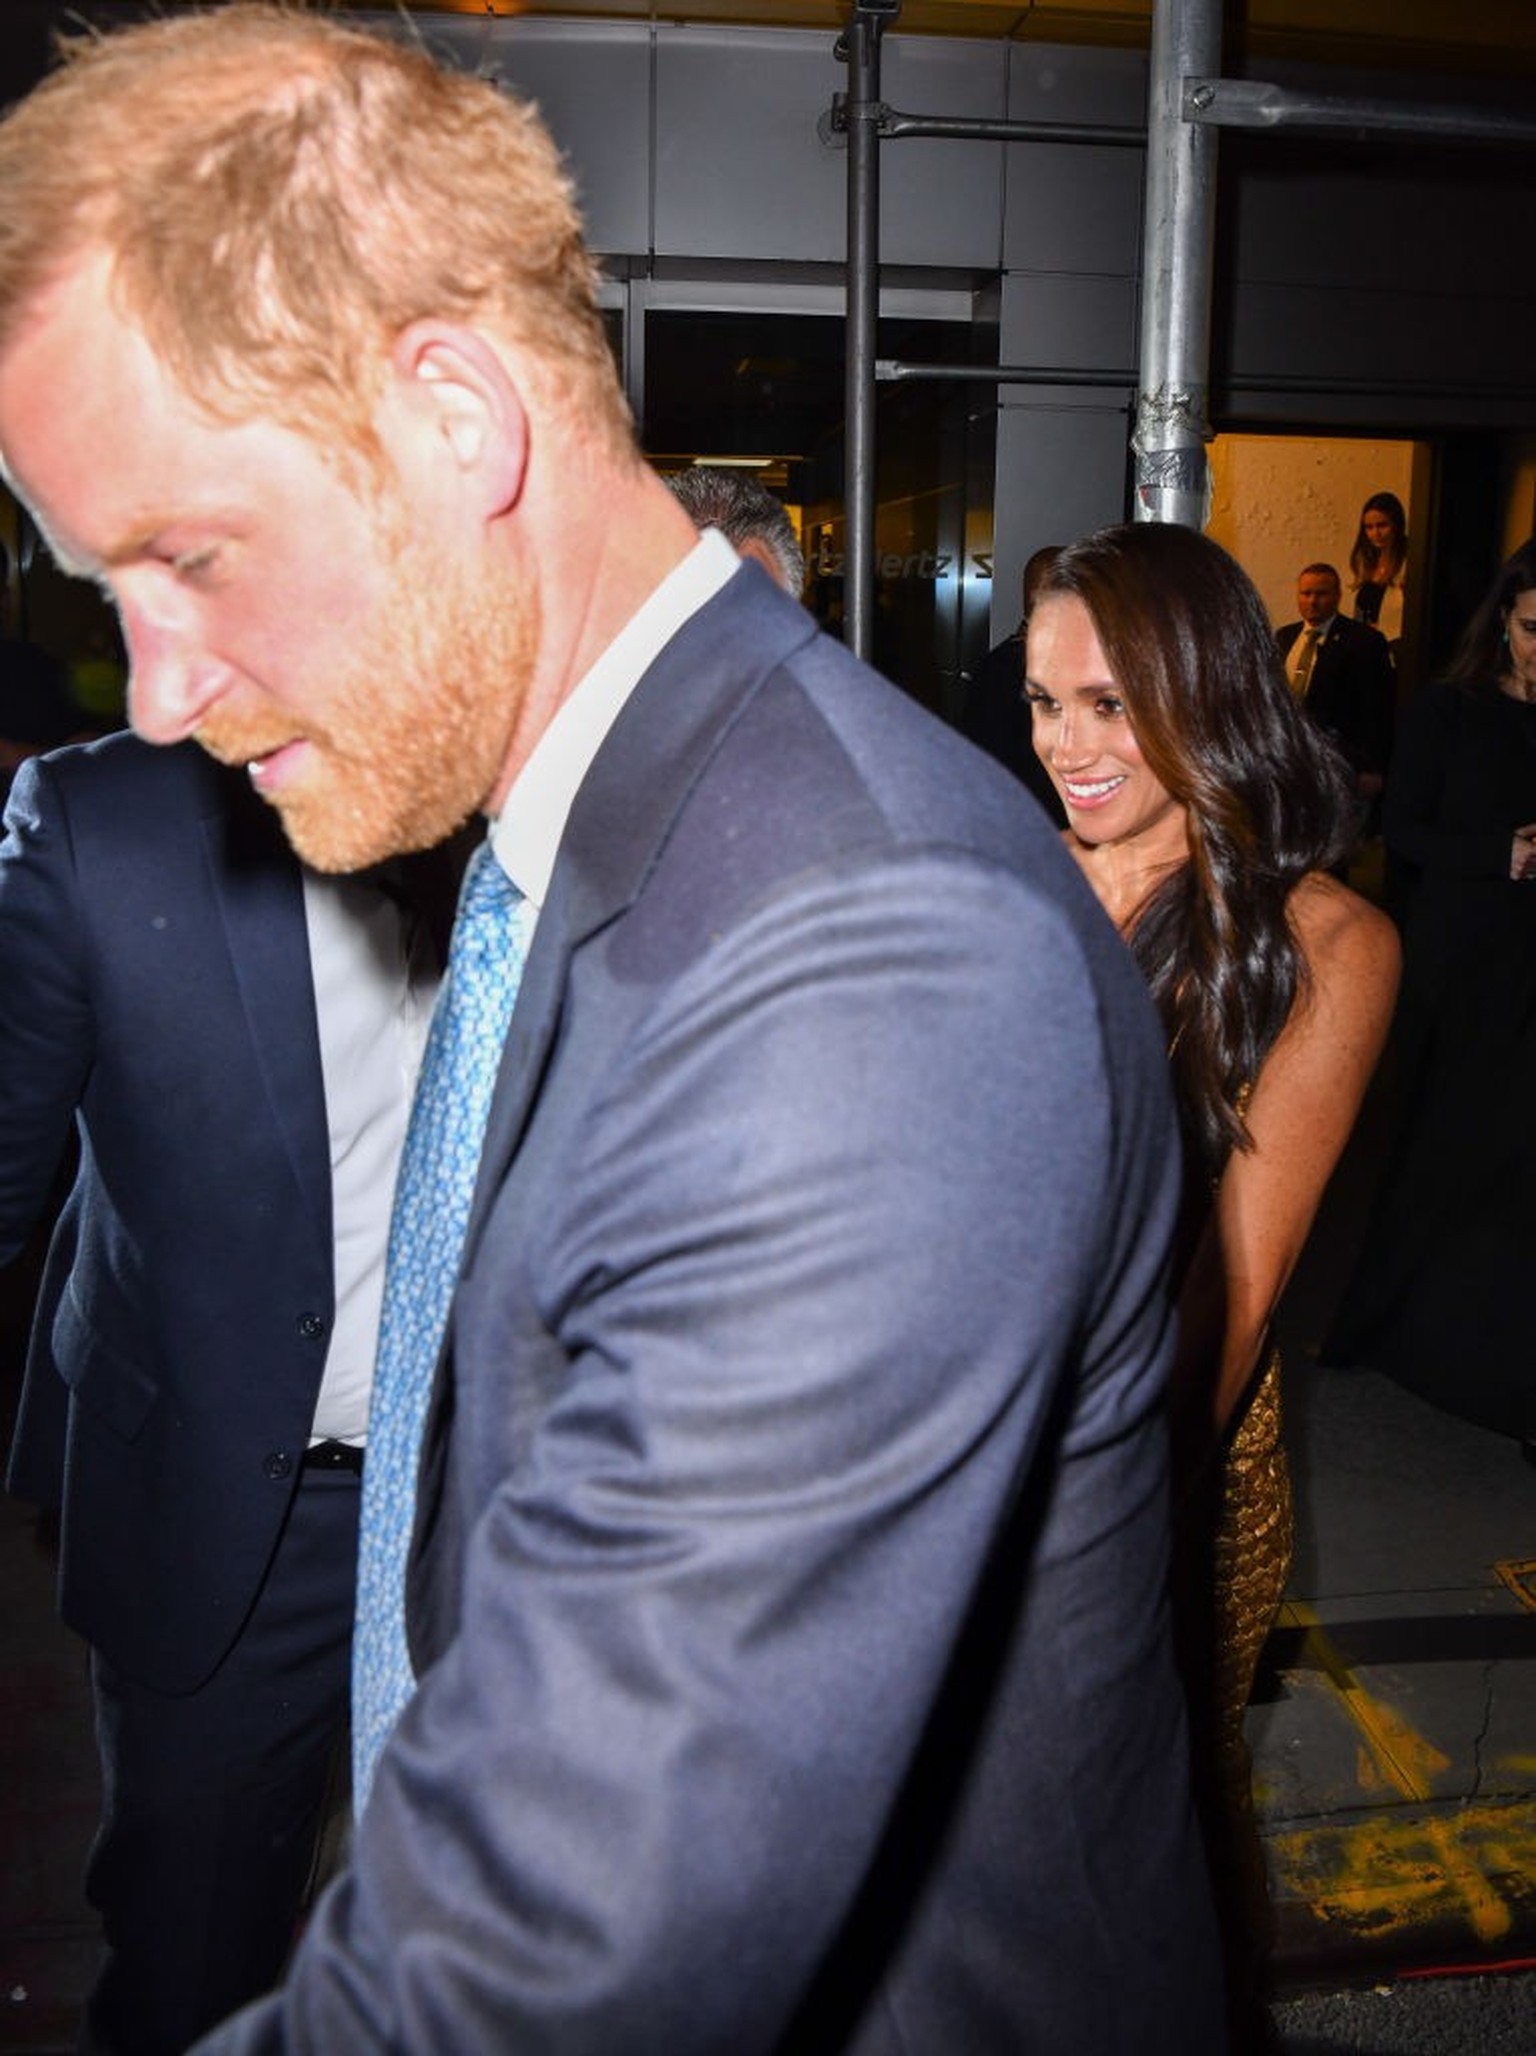 NEW YORK, NEW YORK - MAY 16: Meghan Markle, Duchess of Sussex, and Prince Harry, Duke of Sussex (L) leave The Ziegfeld Theatre on May 16, 2023 in New York City. (Photo by James Devaney/GC Images)